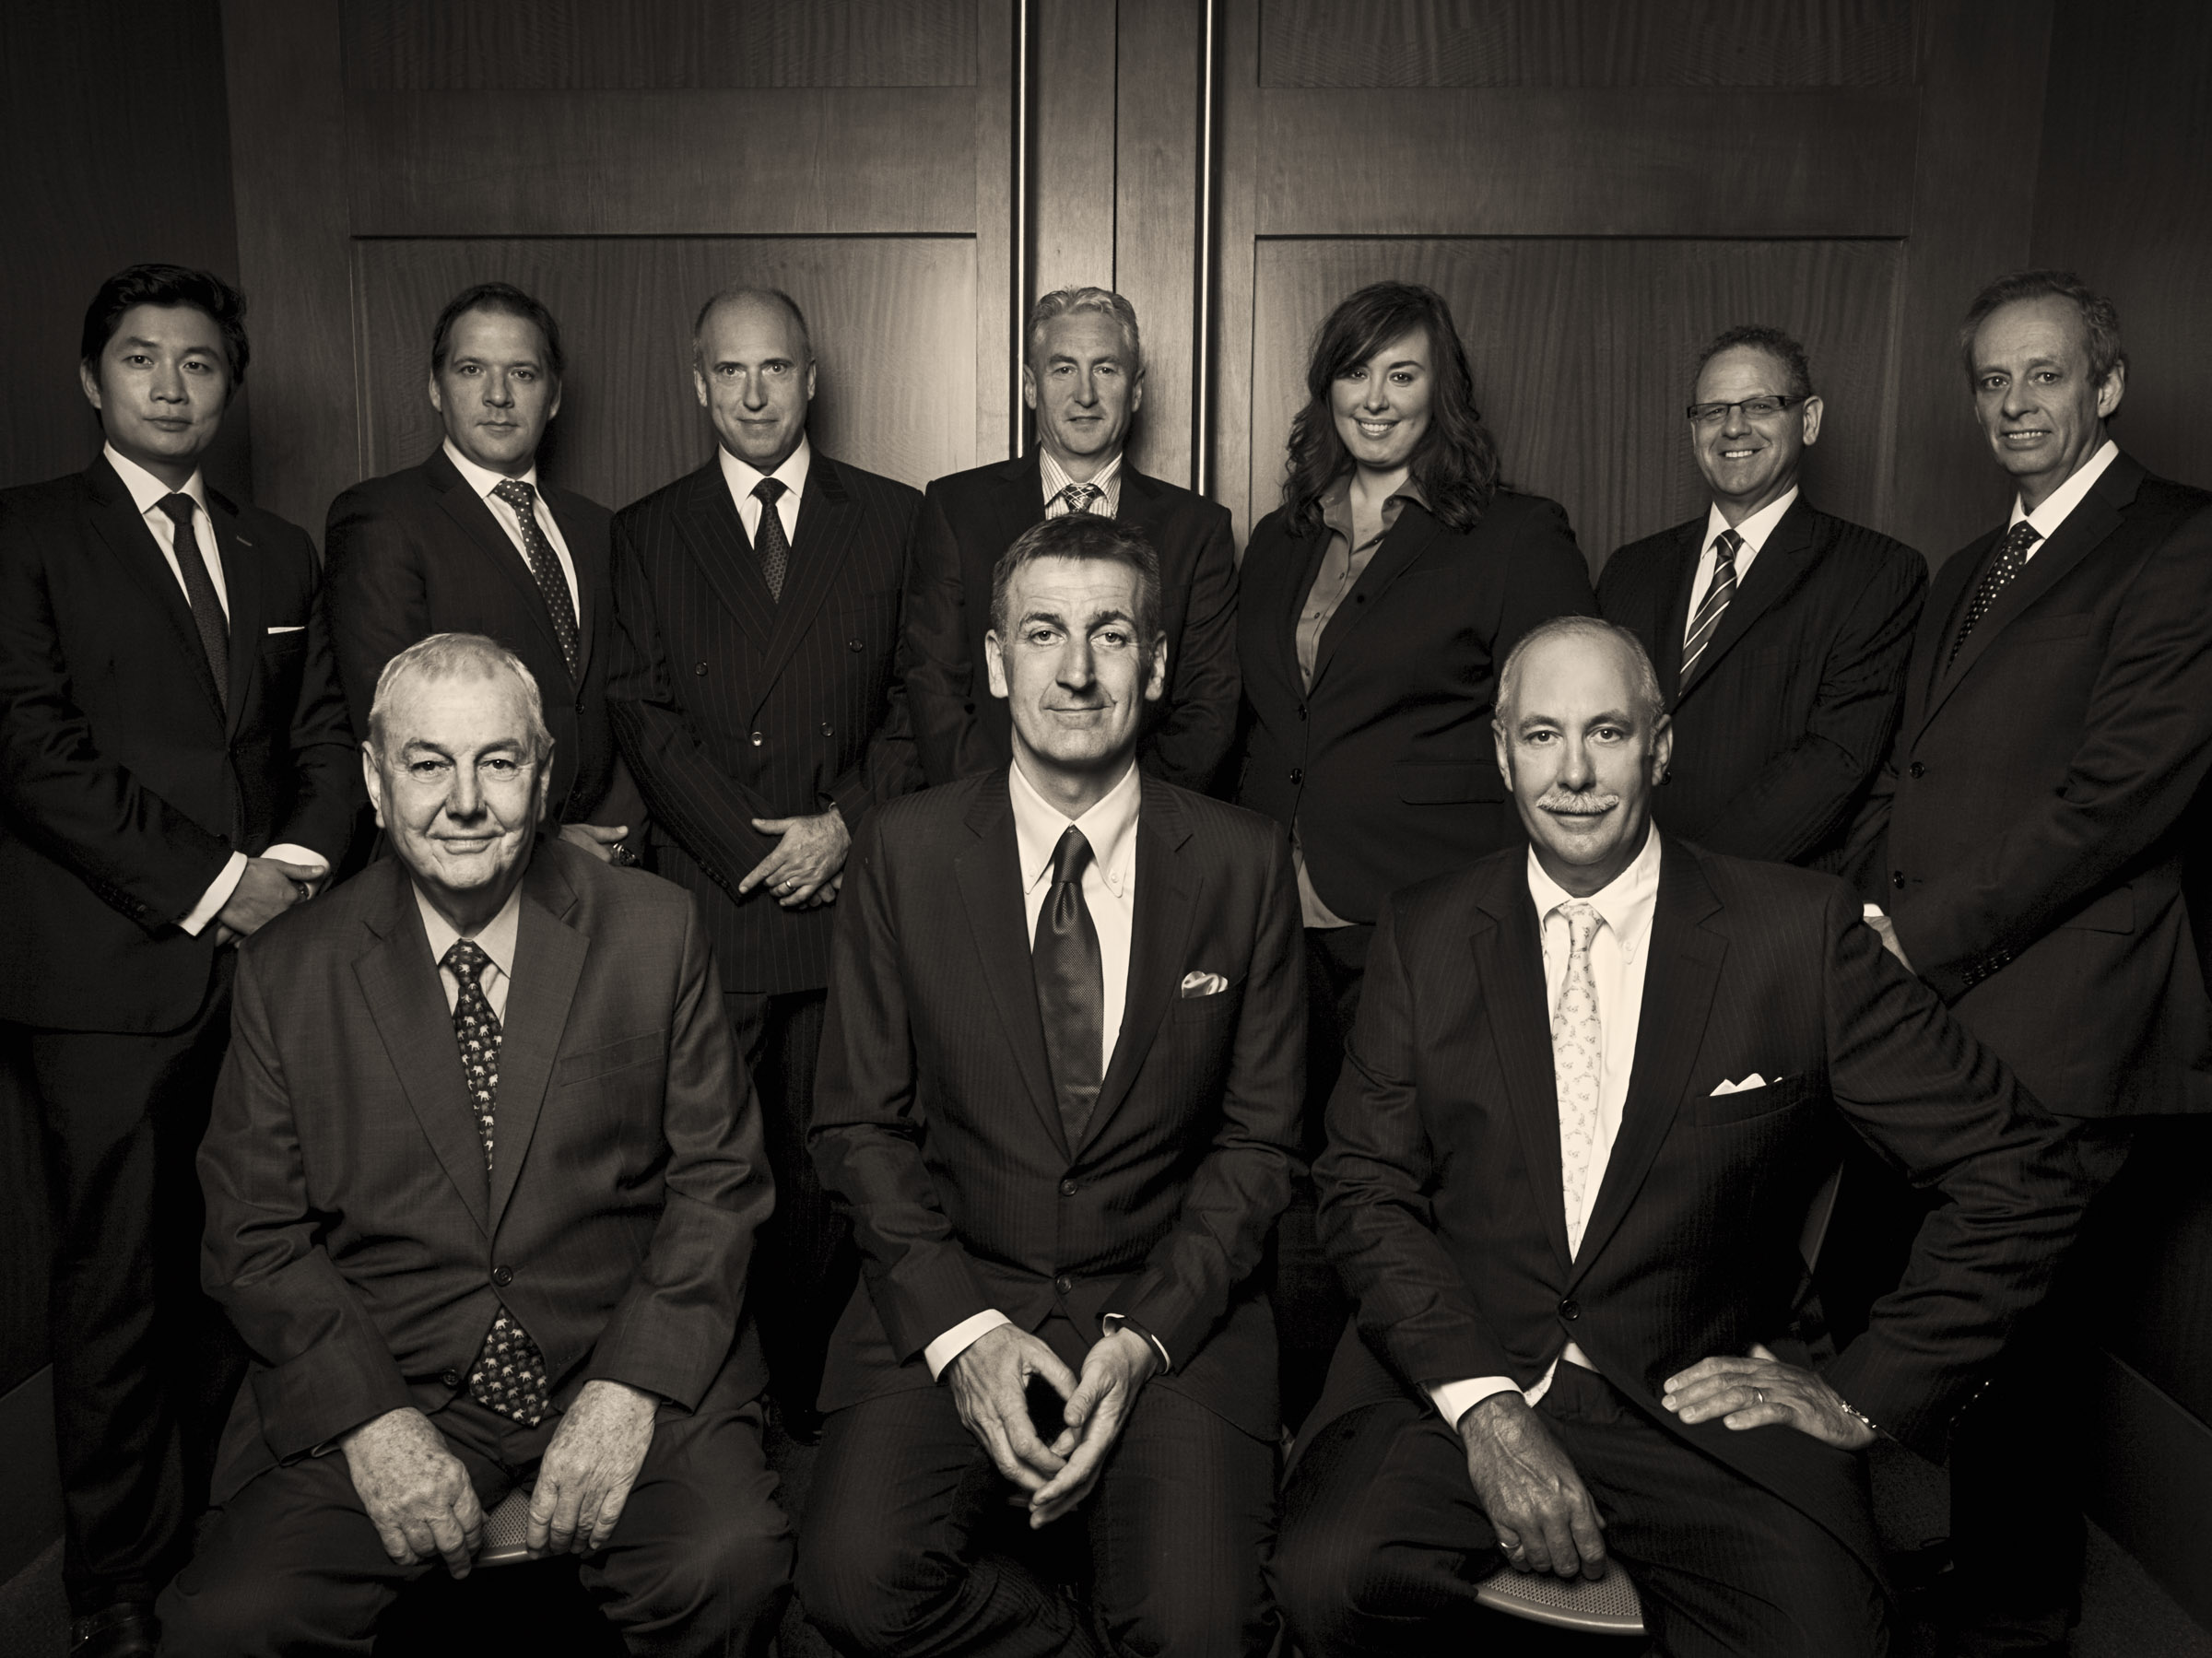 OIL GROUP Portrait by NYC best Executive and Corporate Headshot Photographer Tess Steinkolk Actors and creatives